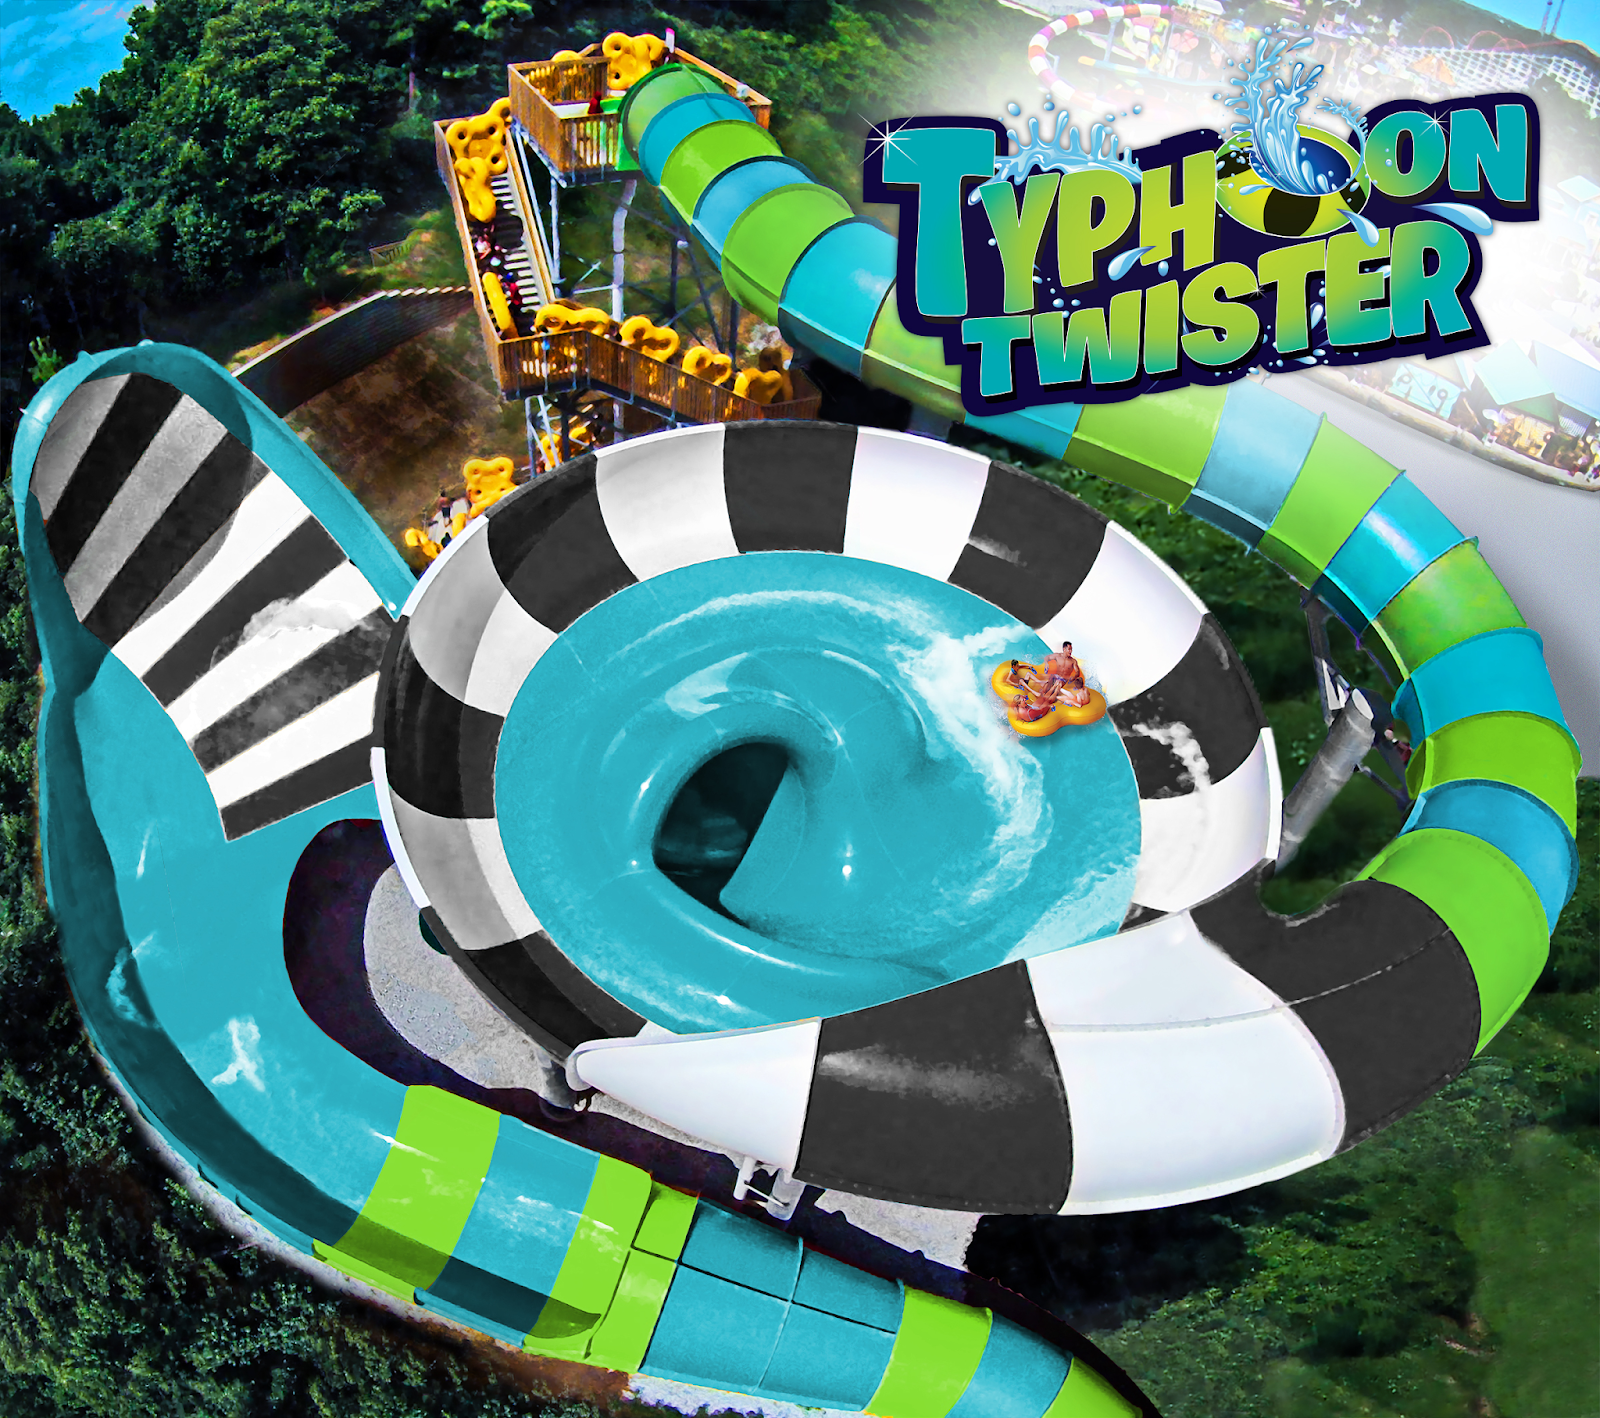 MidwestInfoGuide: Typhoon Twister - New for 2018 (HHSTL)